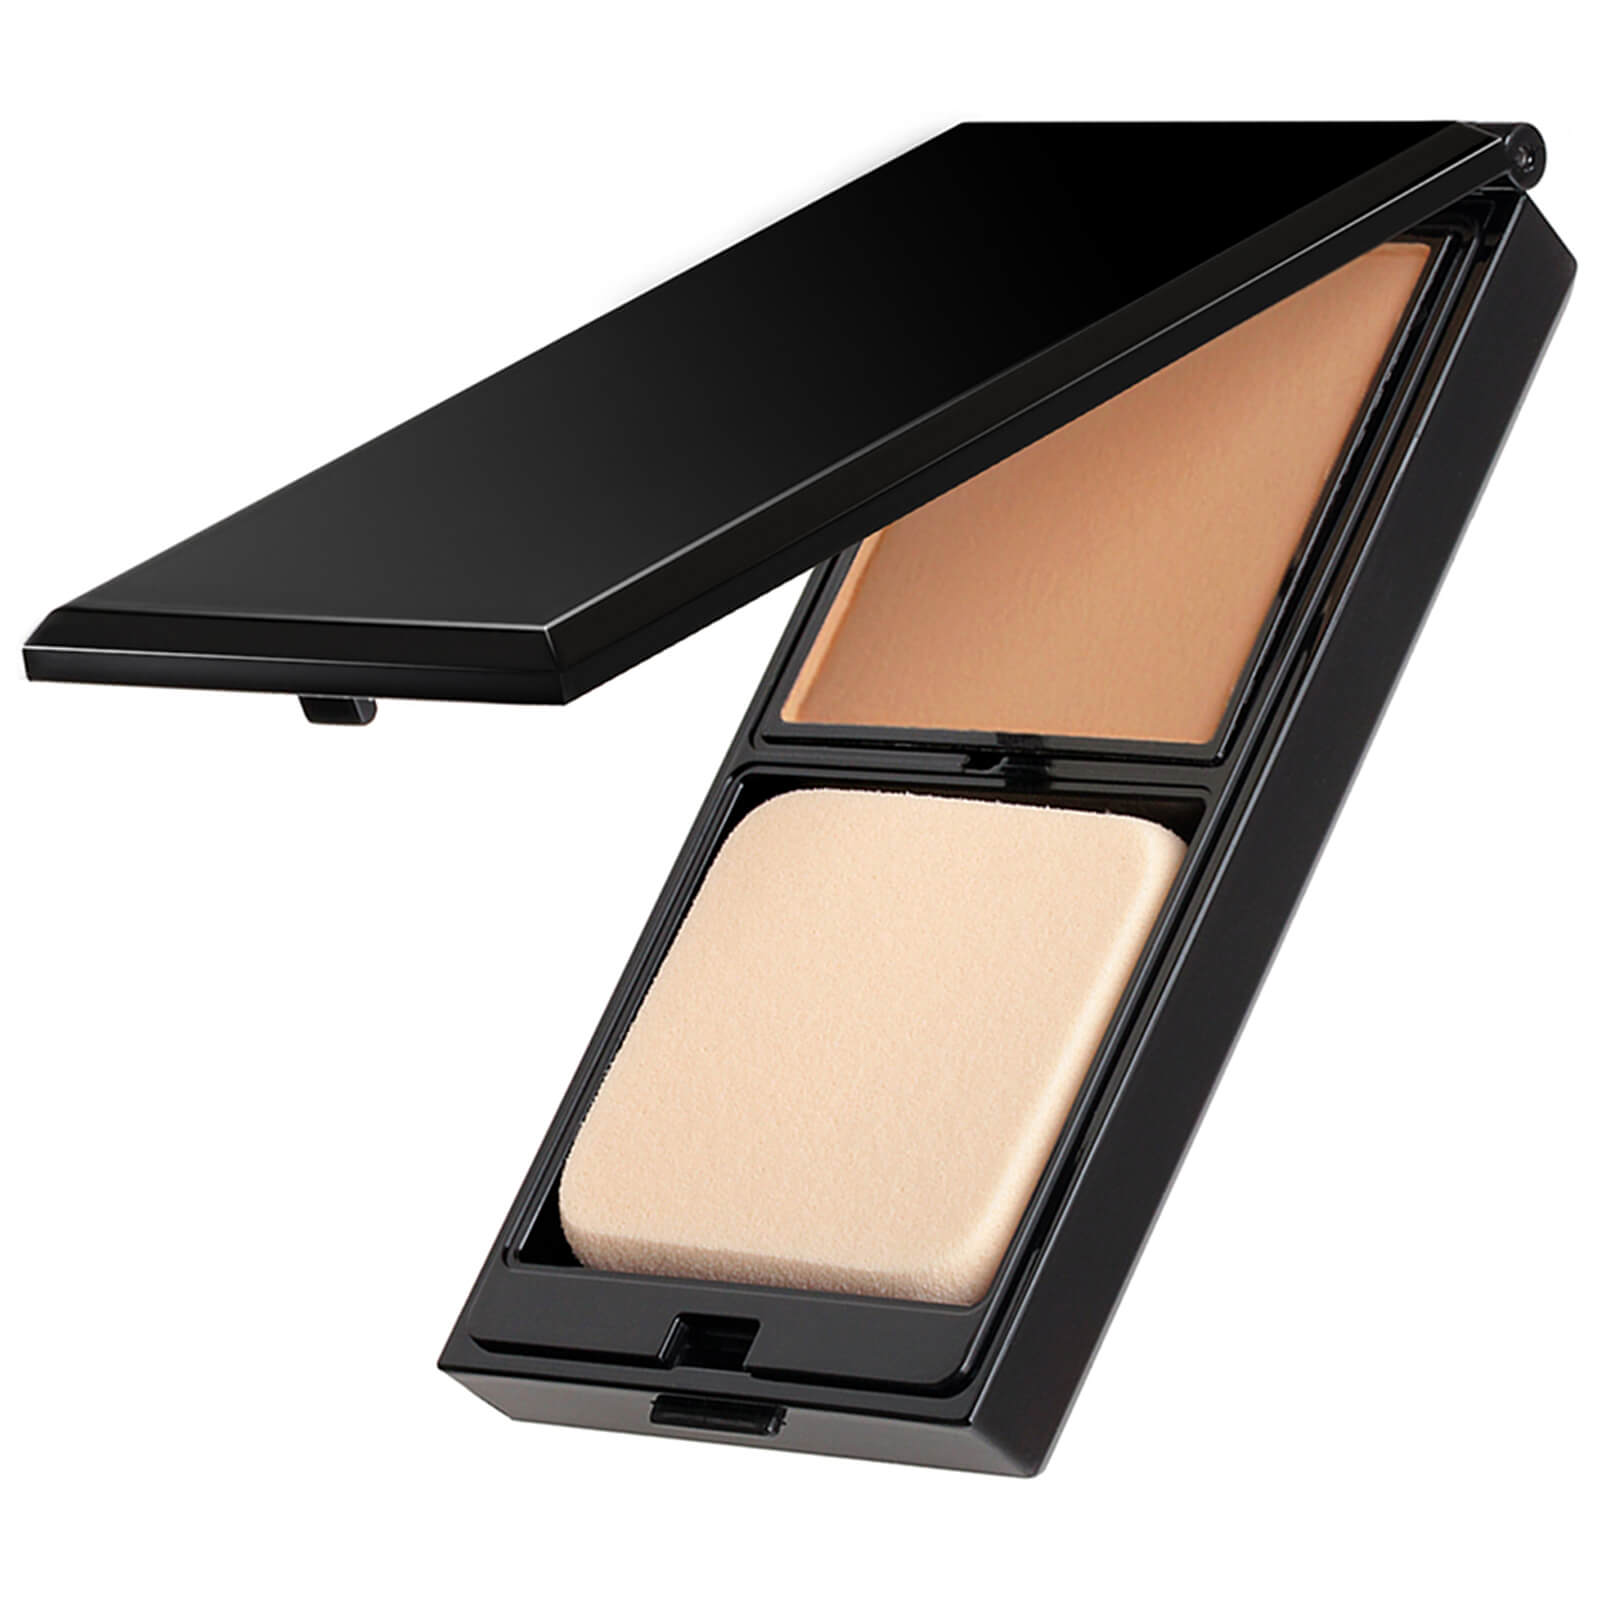 Serge Lutens Compact Foundation Teint si Fin 8g (Various Shades) - I40